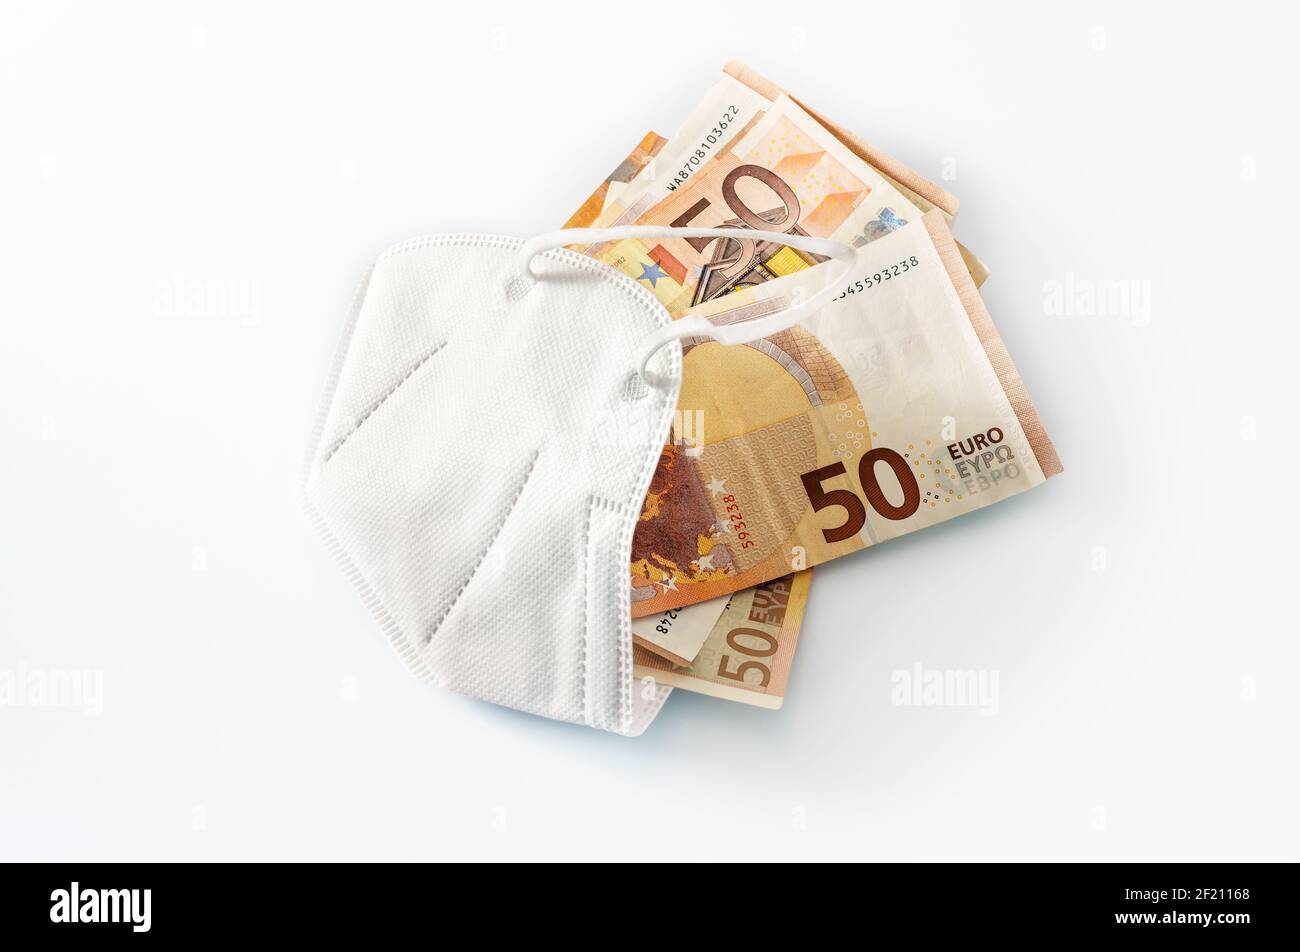 ffp2 medical protection face mask against coronavirus filled with euro banknotes, concept for rising costs in health care or enrichment by corruption, Stock Photo